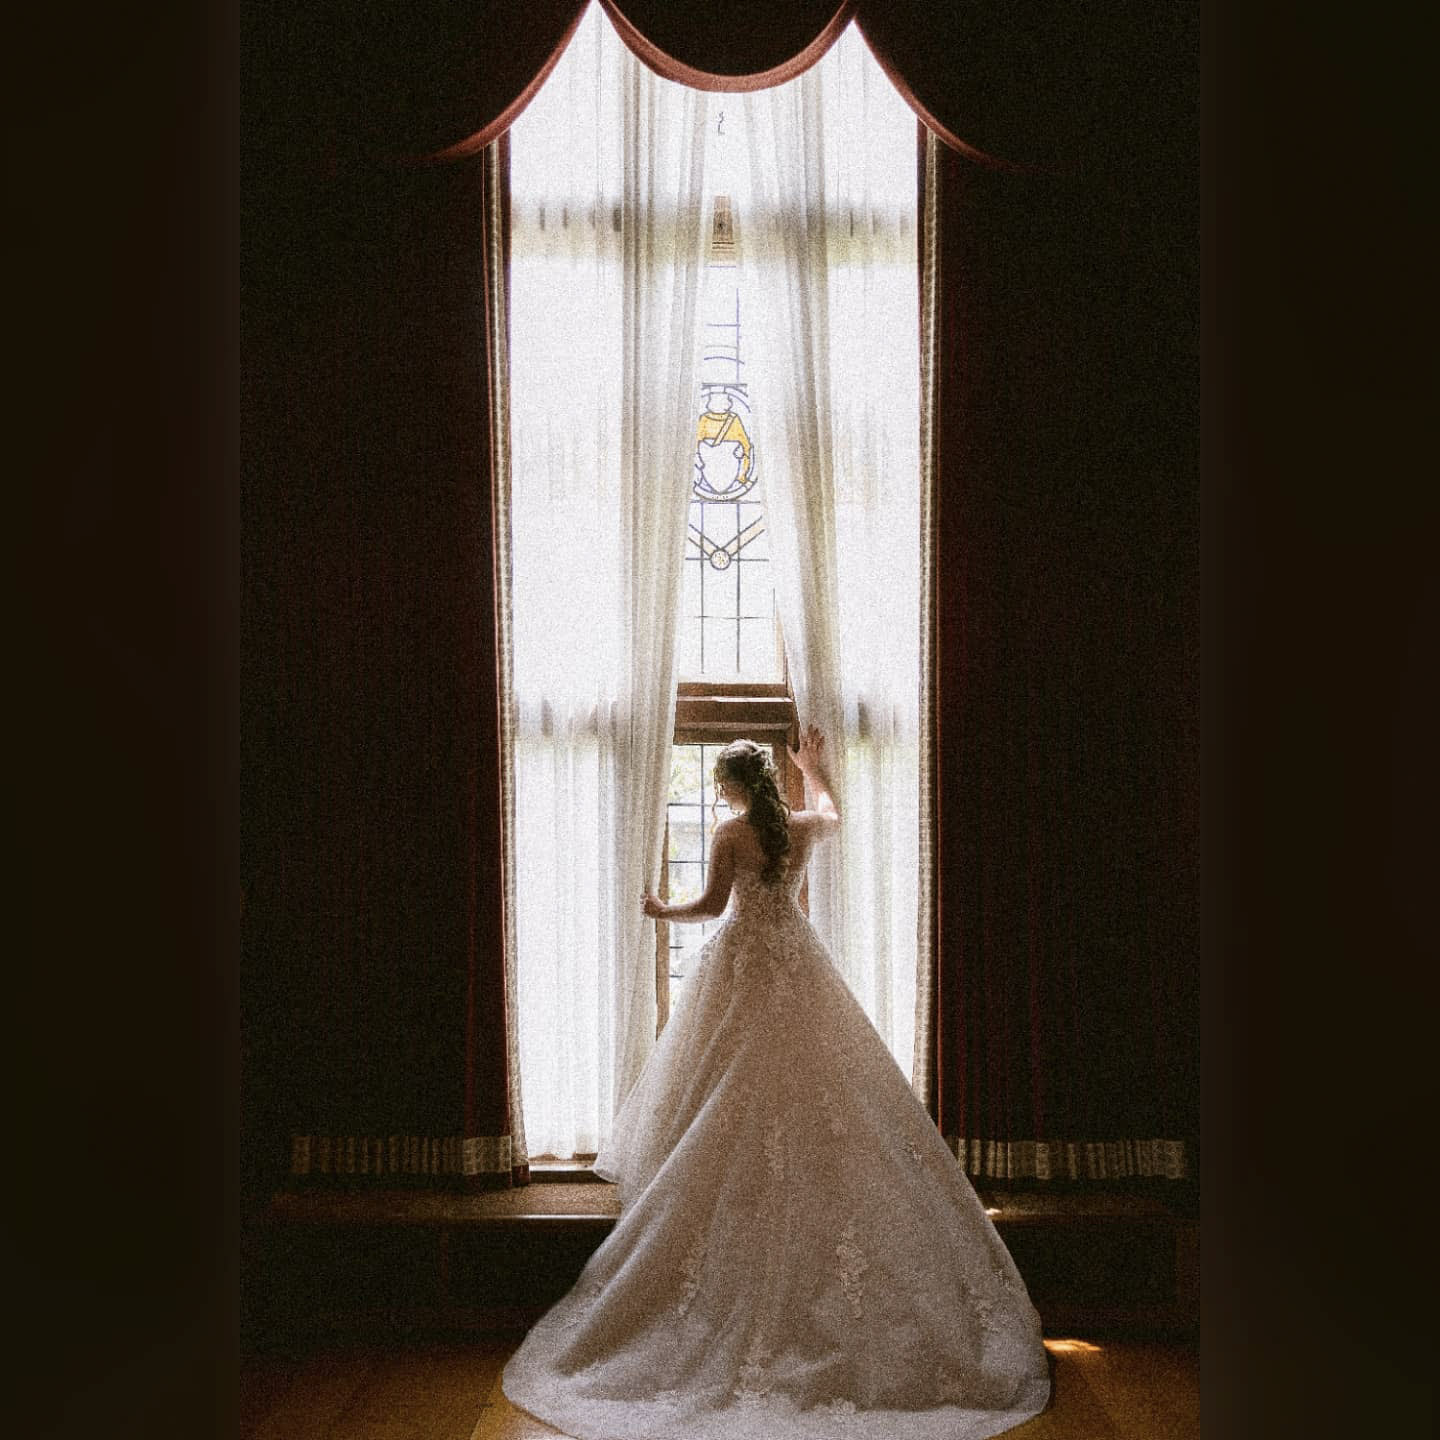 a wedding bride posing in her bridal attire standing in a dark room with large windows